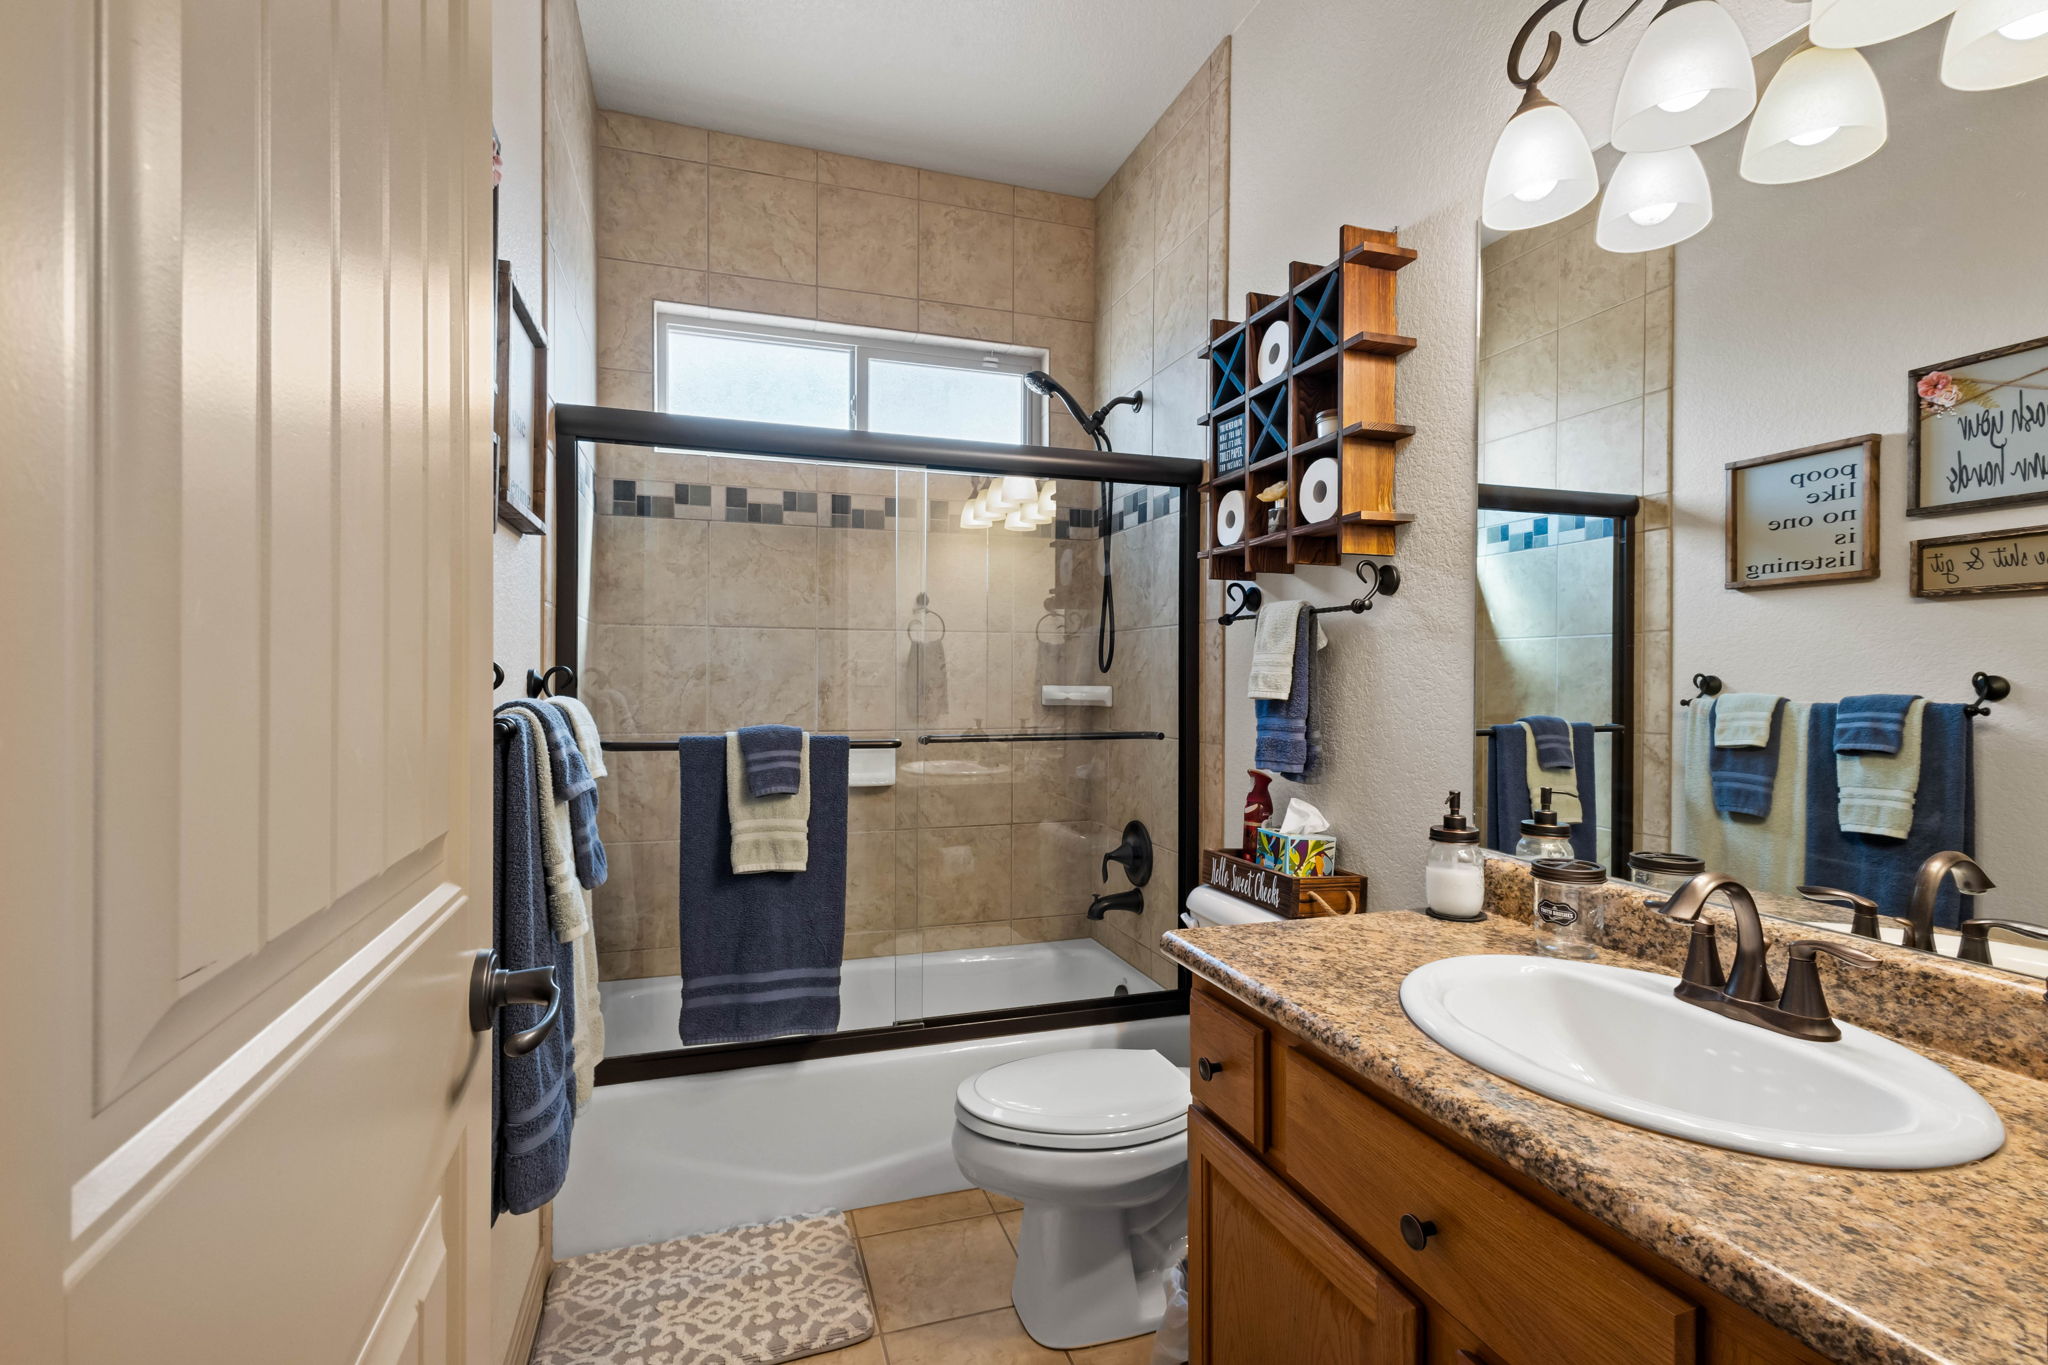 Full bathroom with tile flooring, large vanity, shower/tub combo with glass enclosure accented with tiles.